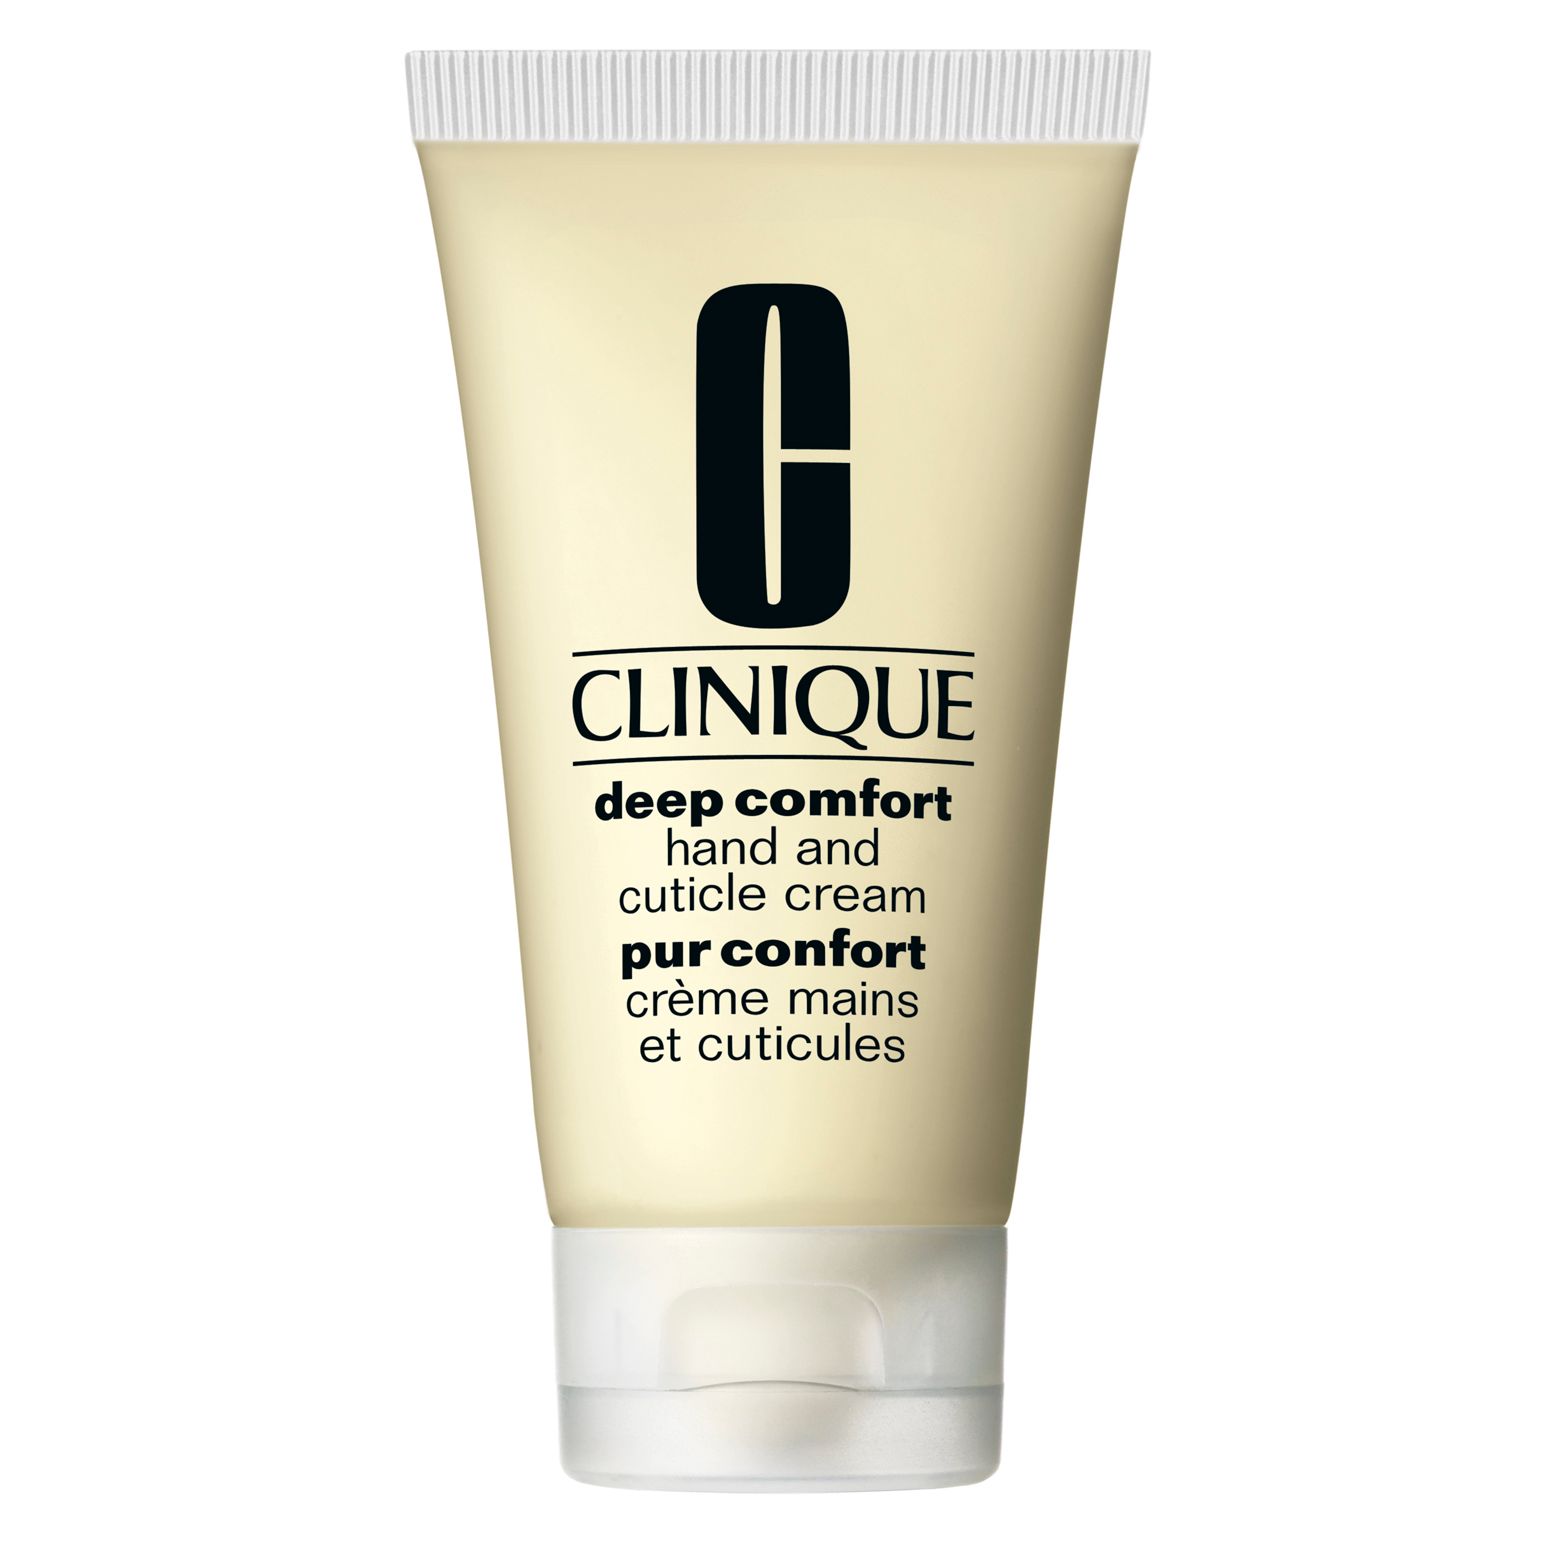 Clinique Deep Comfort Hand and Cuticle Cream, 75ml